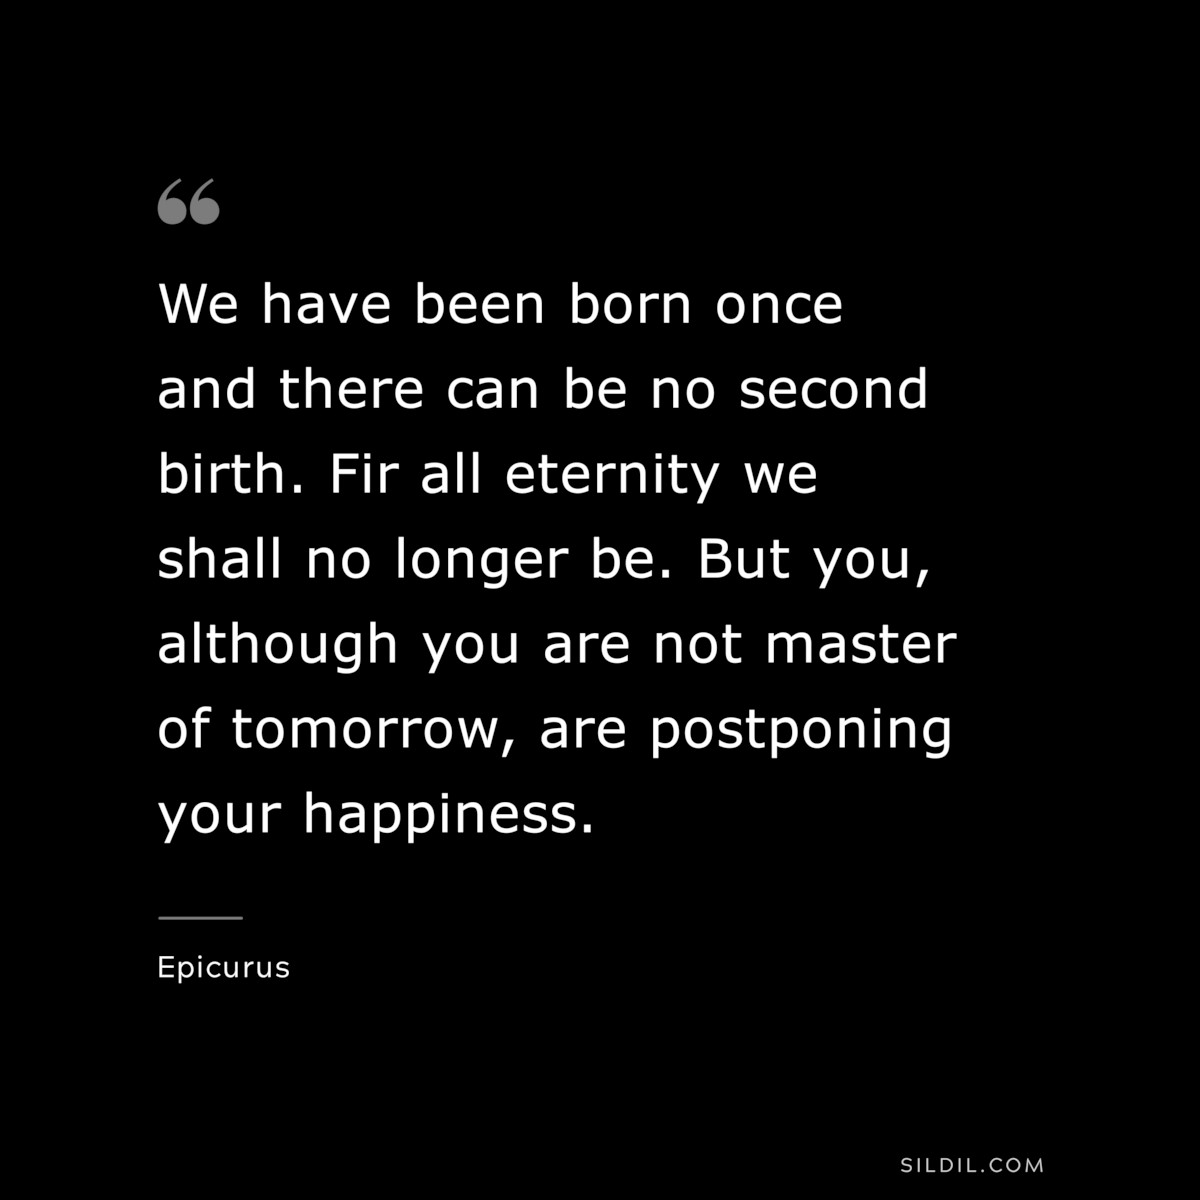 We have been born once and there can be no second birth. Fir all eternity we shall no longer be. But you, although you are not master of tomorrow, are postponing your happiness. — Epicurus